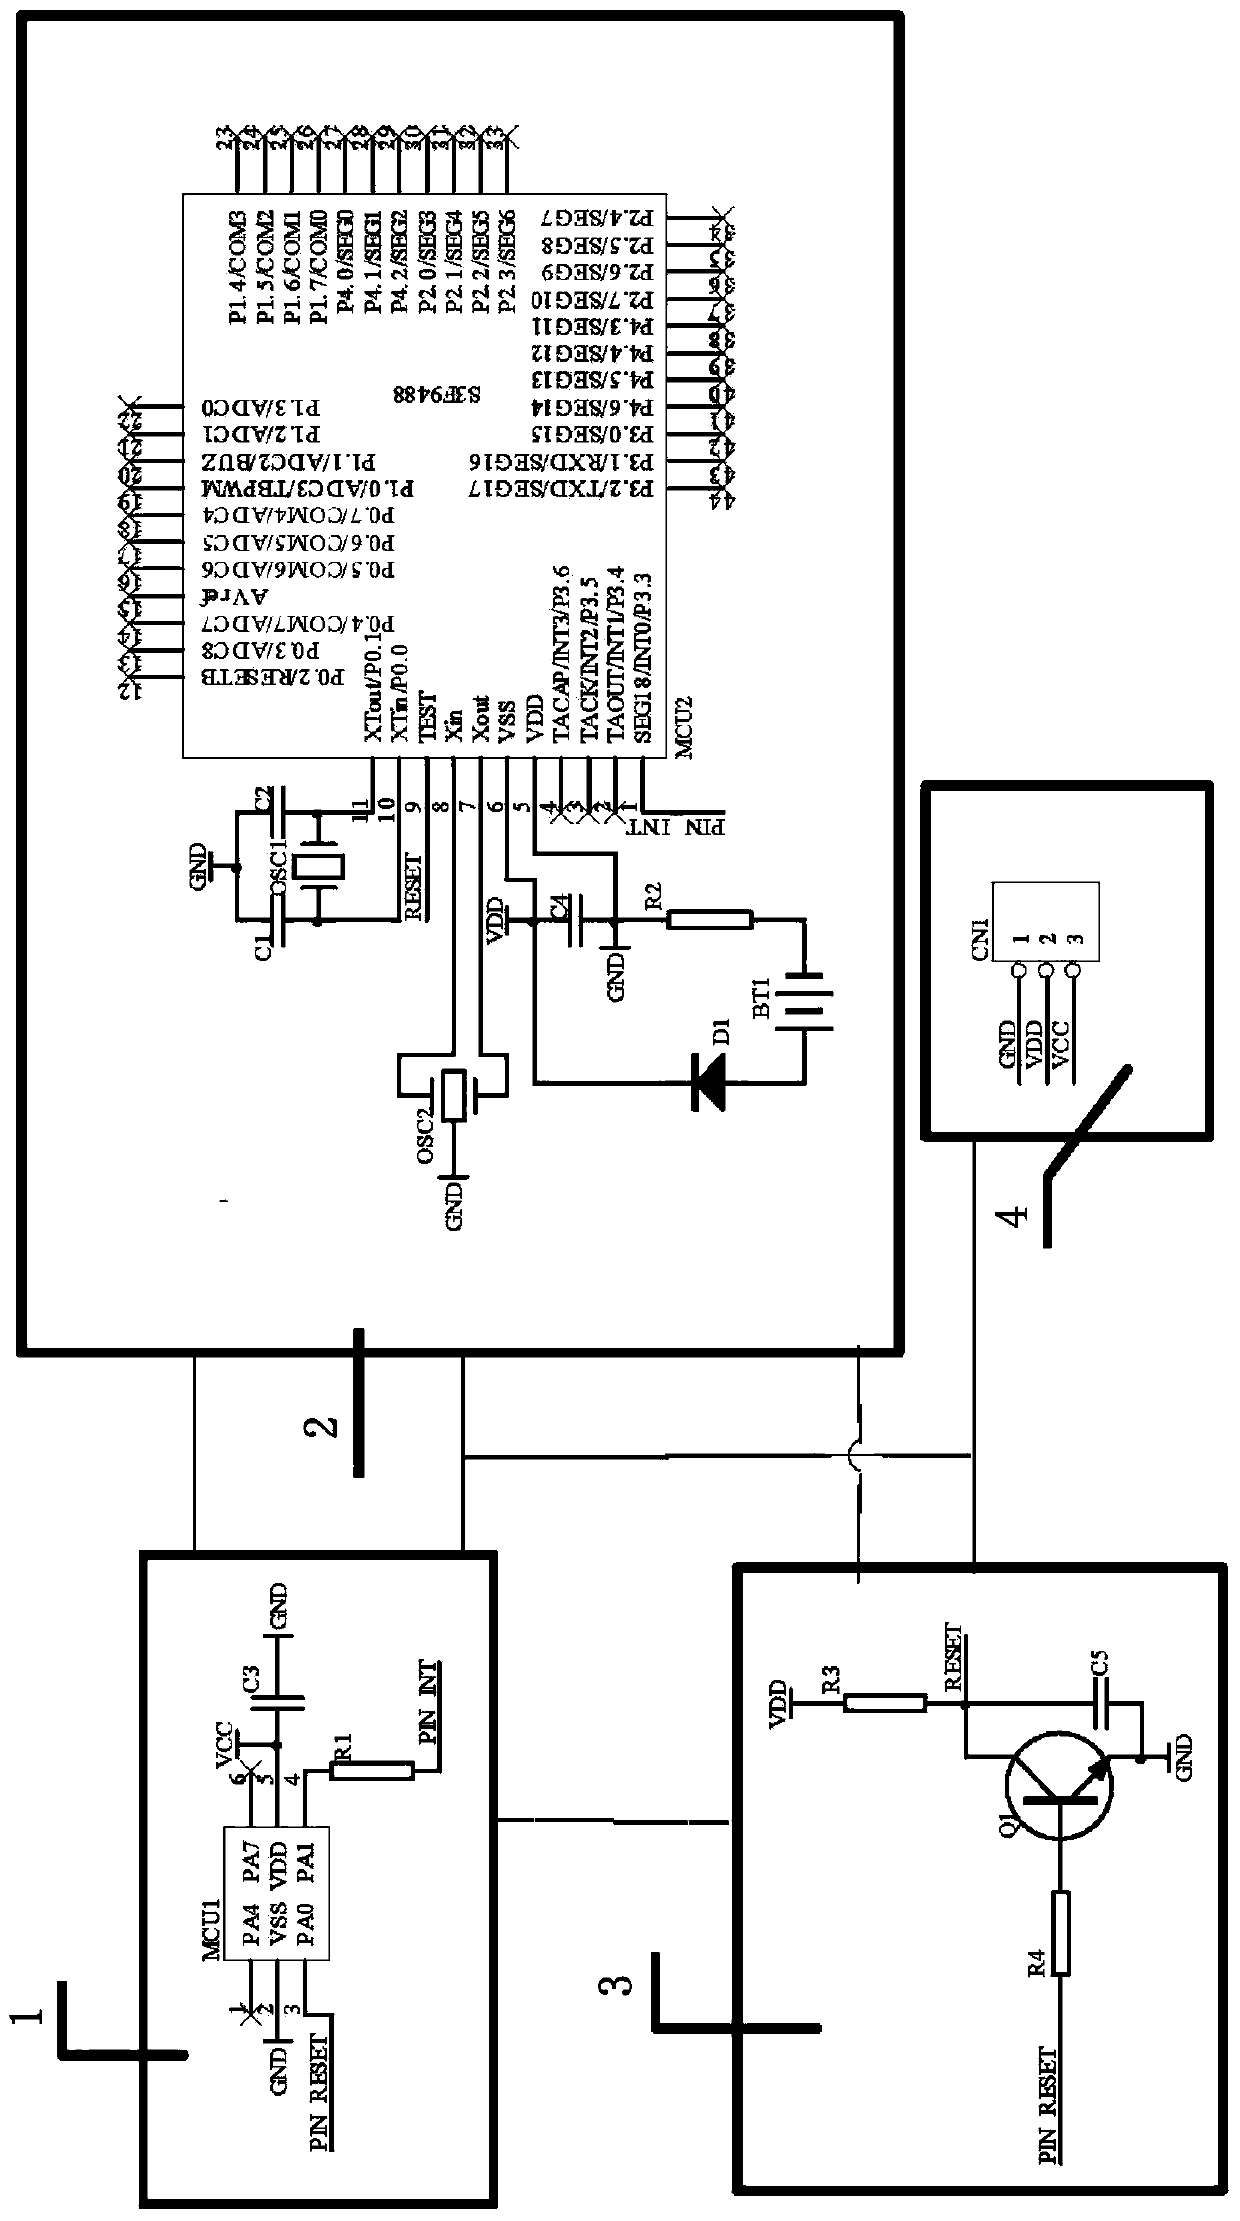 Single chip microcomputer controlled power grid detection and reset circuit